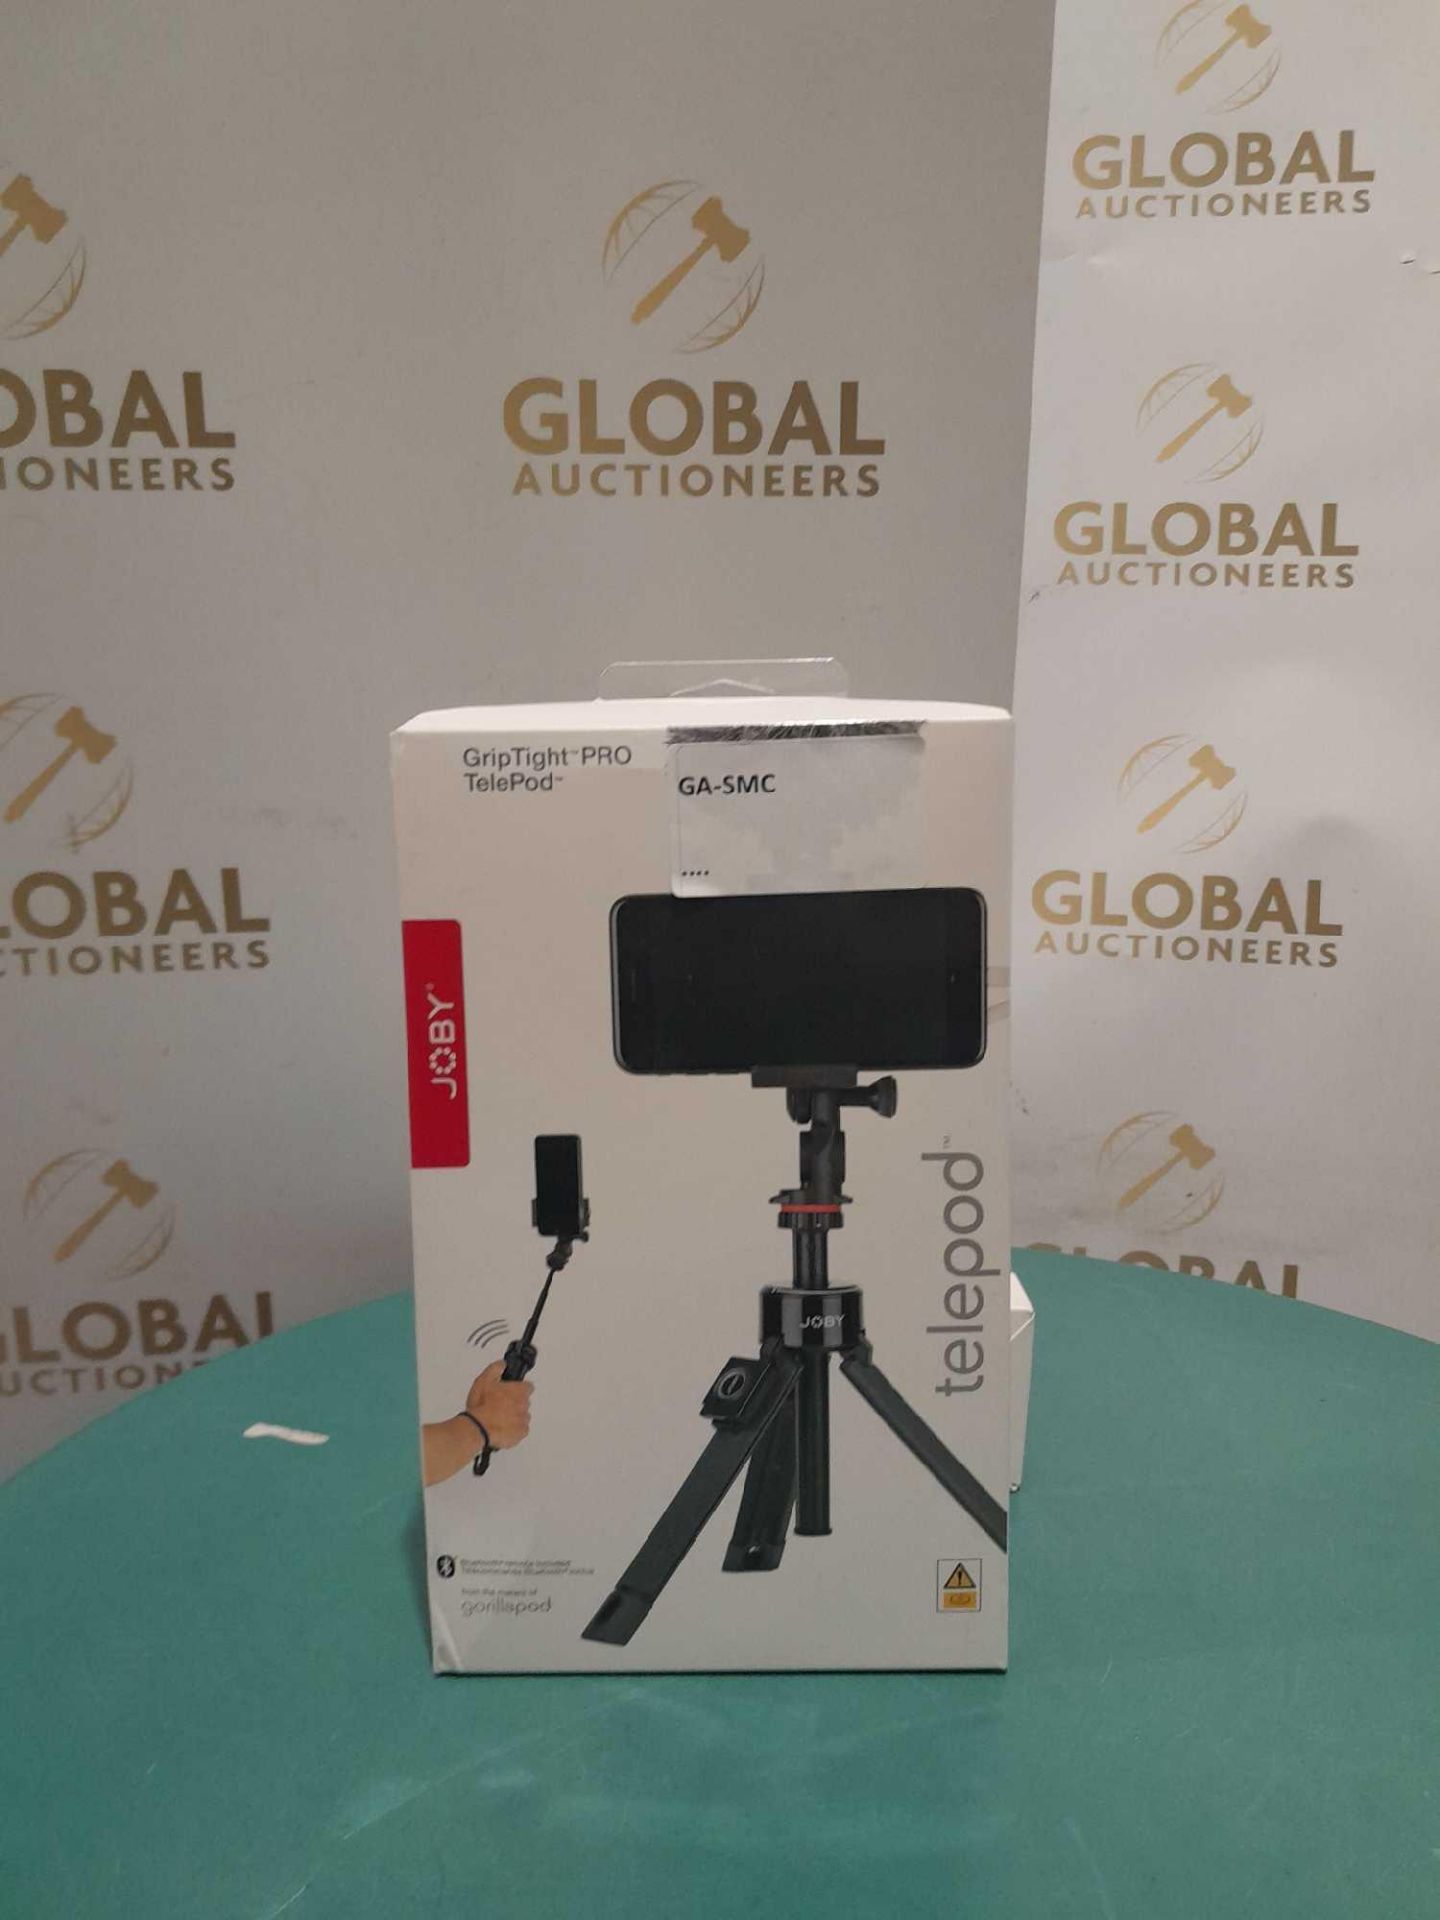 RRP £100 Boxed Joby Grip Tight Pro Telepod iPhone Tripod - Image 2 of 4